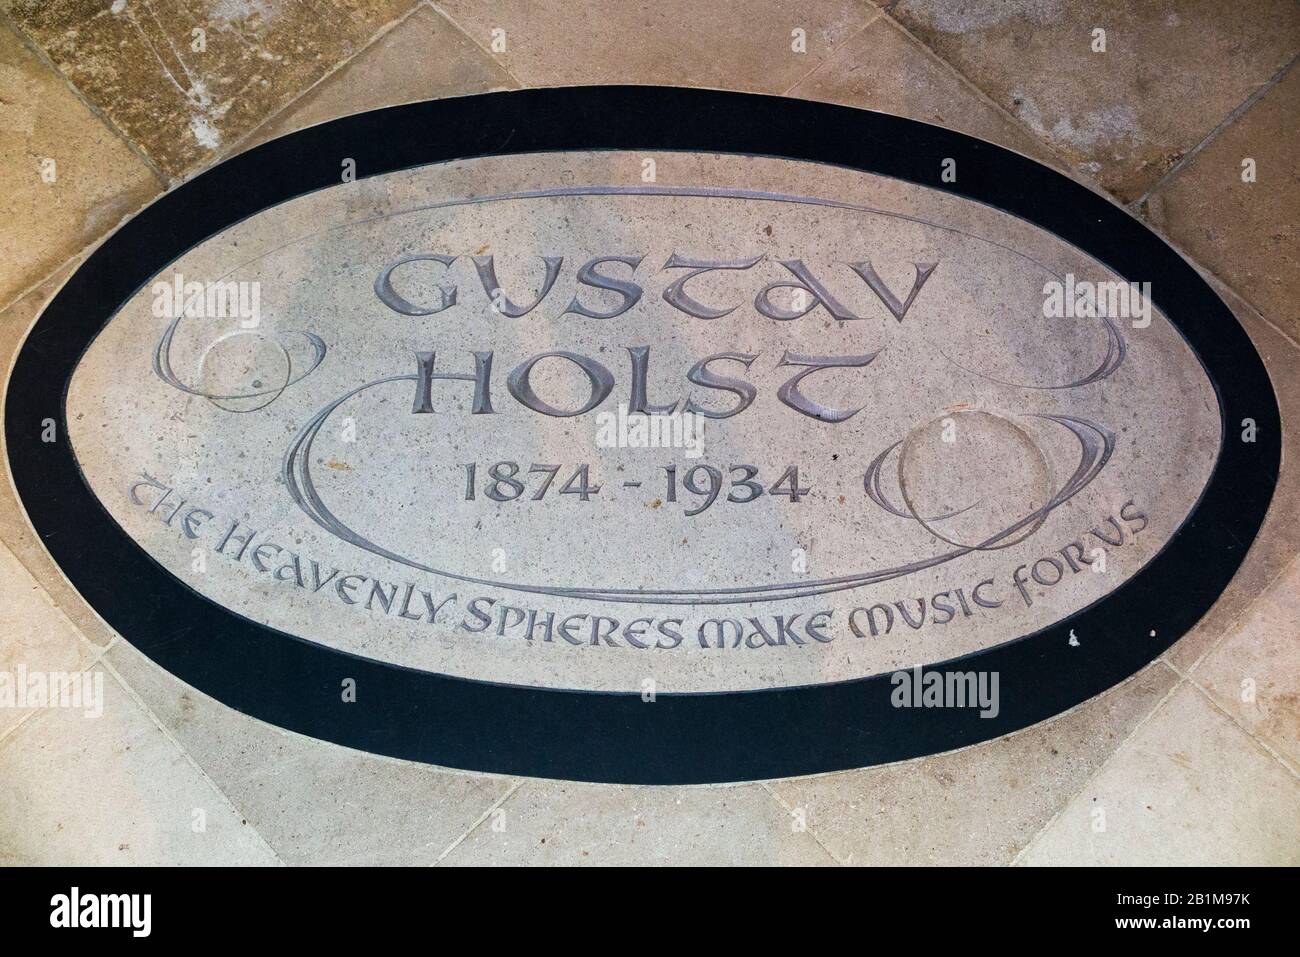 Gustav Holst / Holsts Memorial stone plaque in the floor Chichester Cathedral. UK (114) Stock Photo